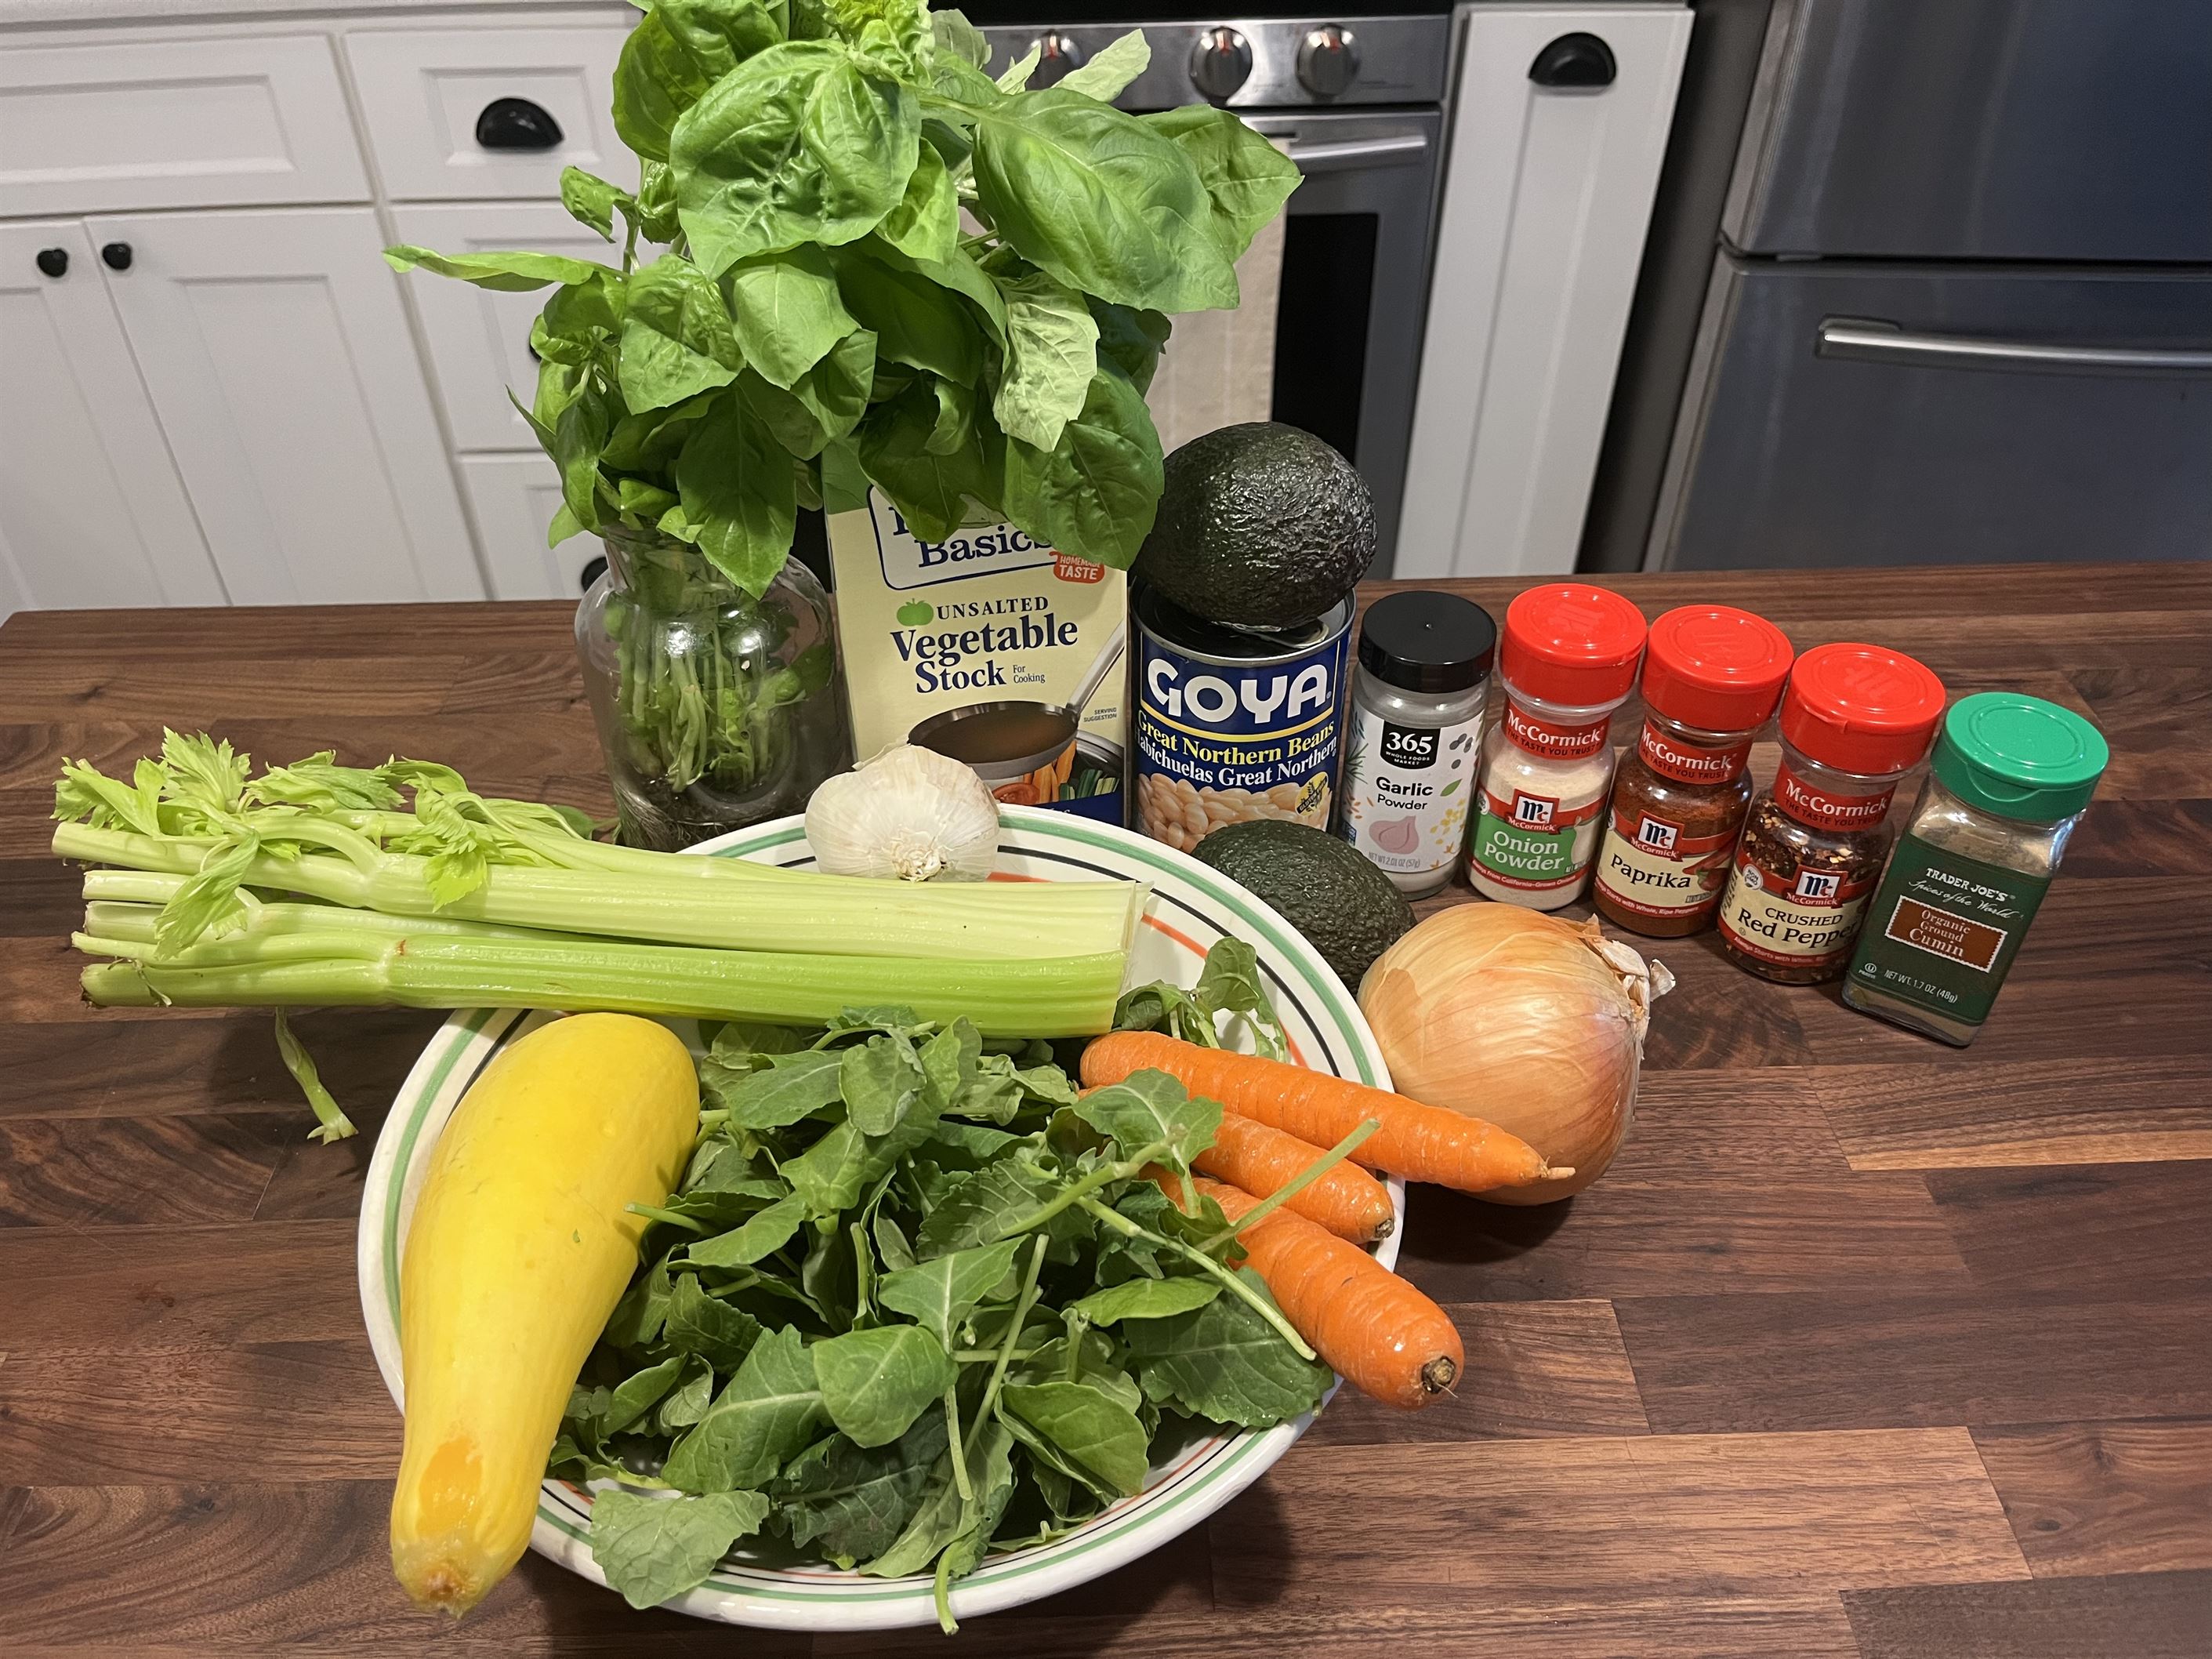 The ingredients you will need for this vegetable soup.
Courtney Lockwood | The Montclarion